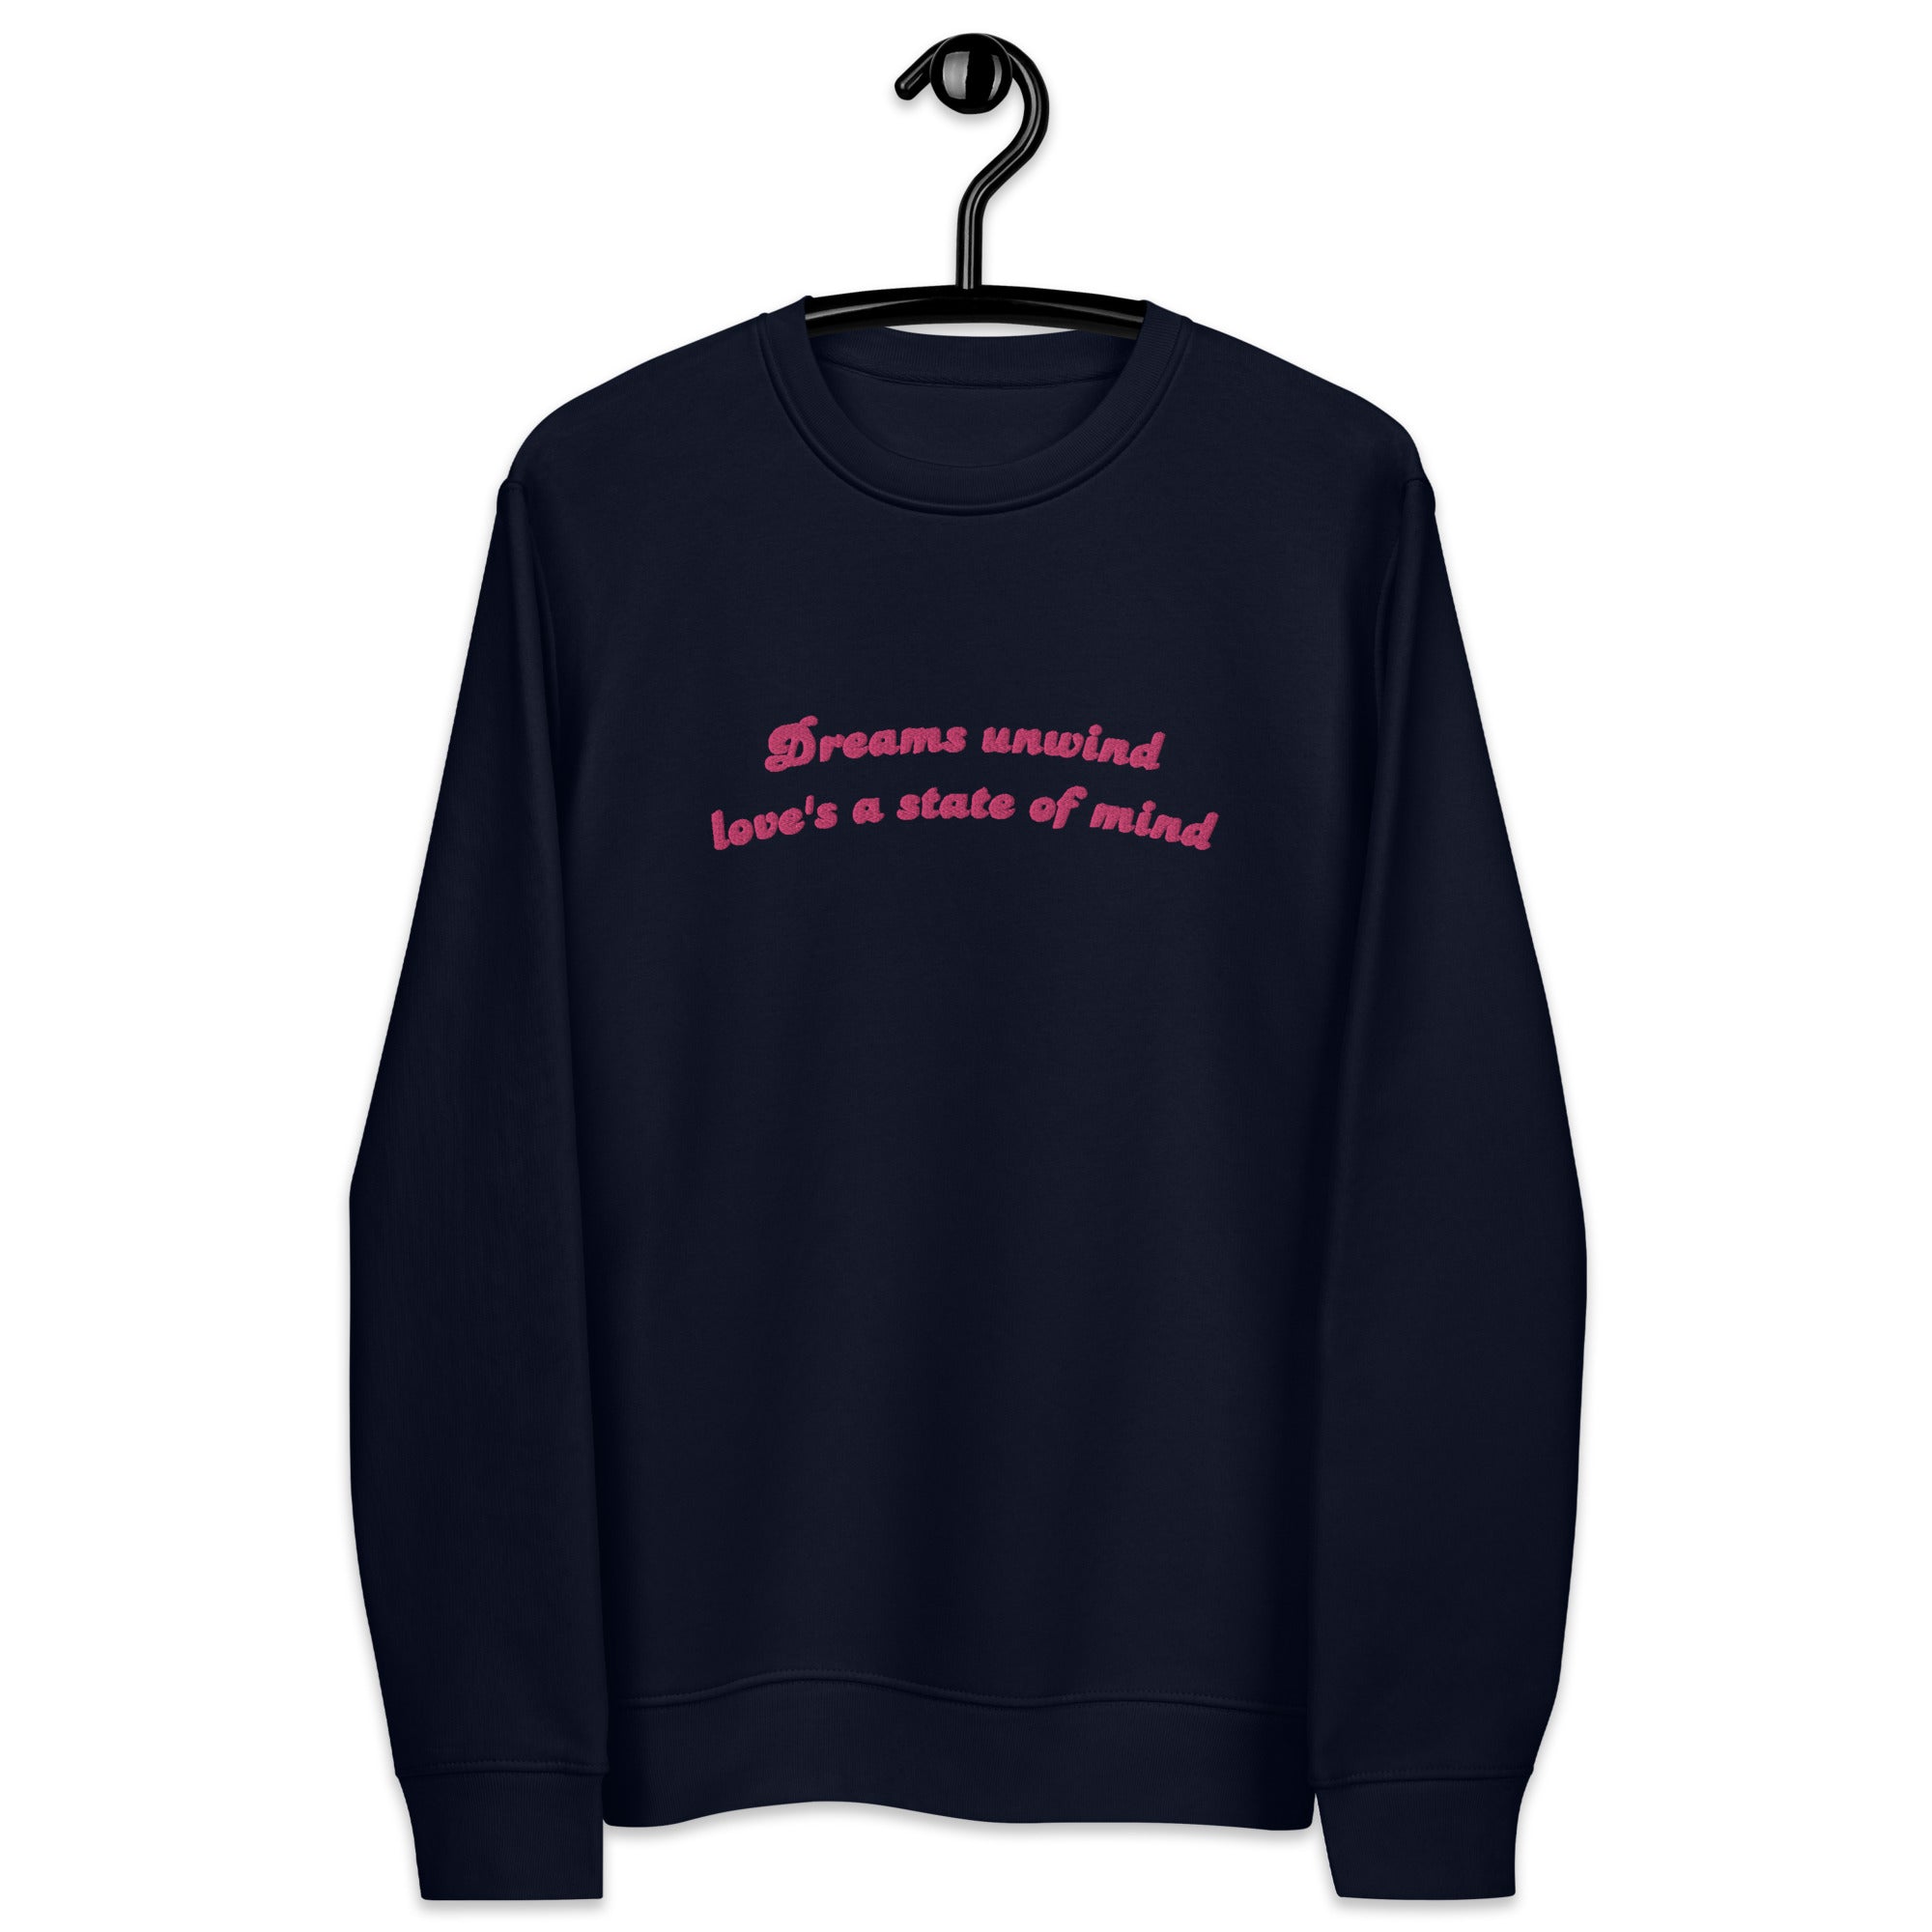 DREAMS UNWIND LOVE'S A STATE OF MIND Embroidered Unisex Organic Sweatshirt (pink text)